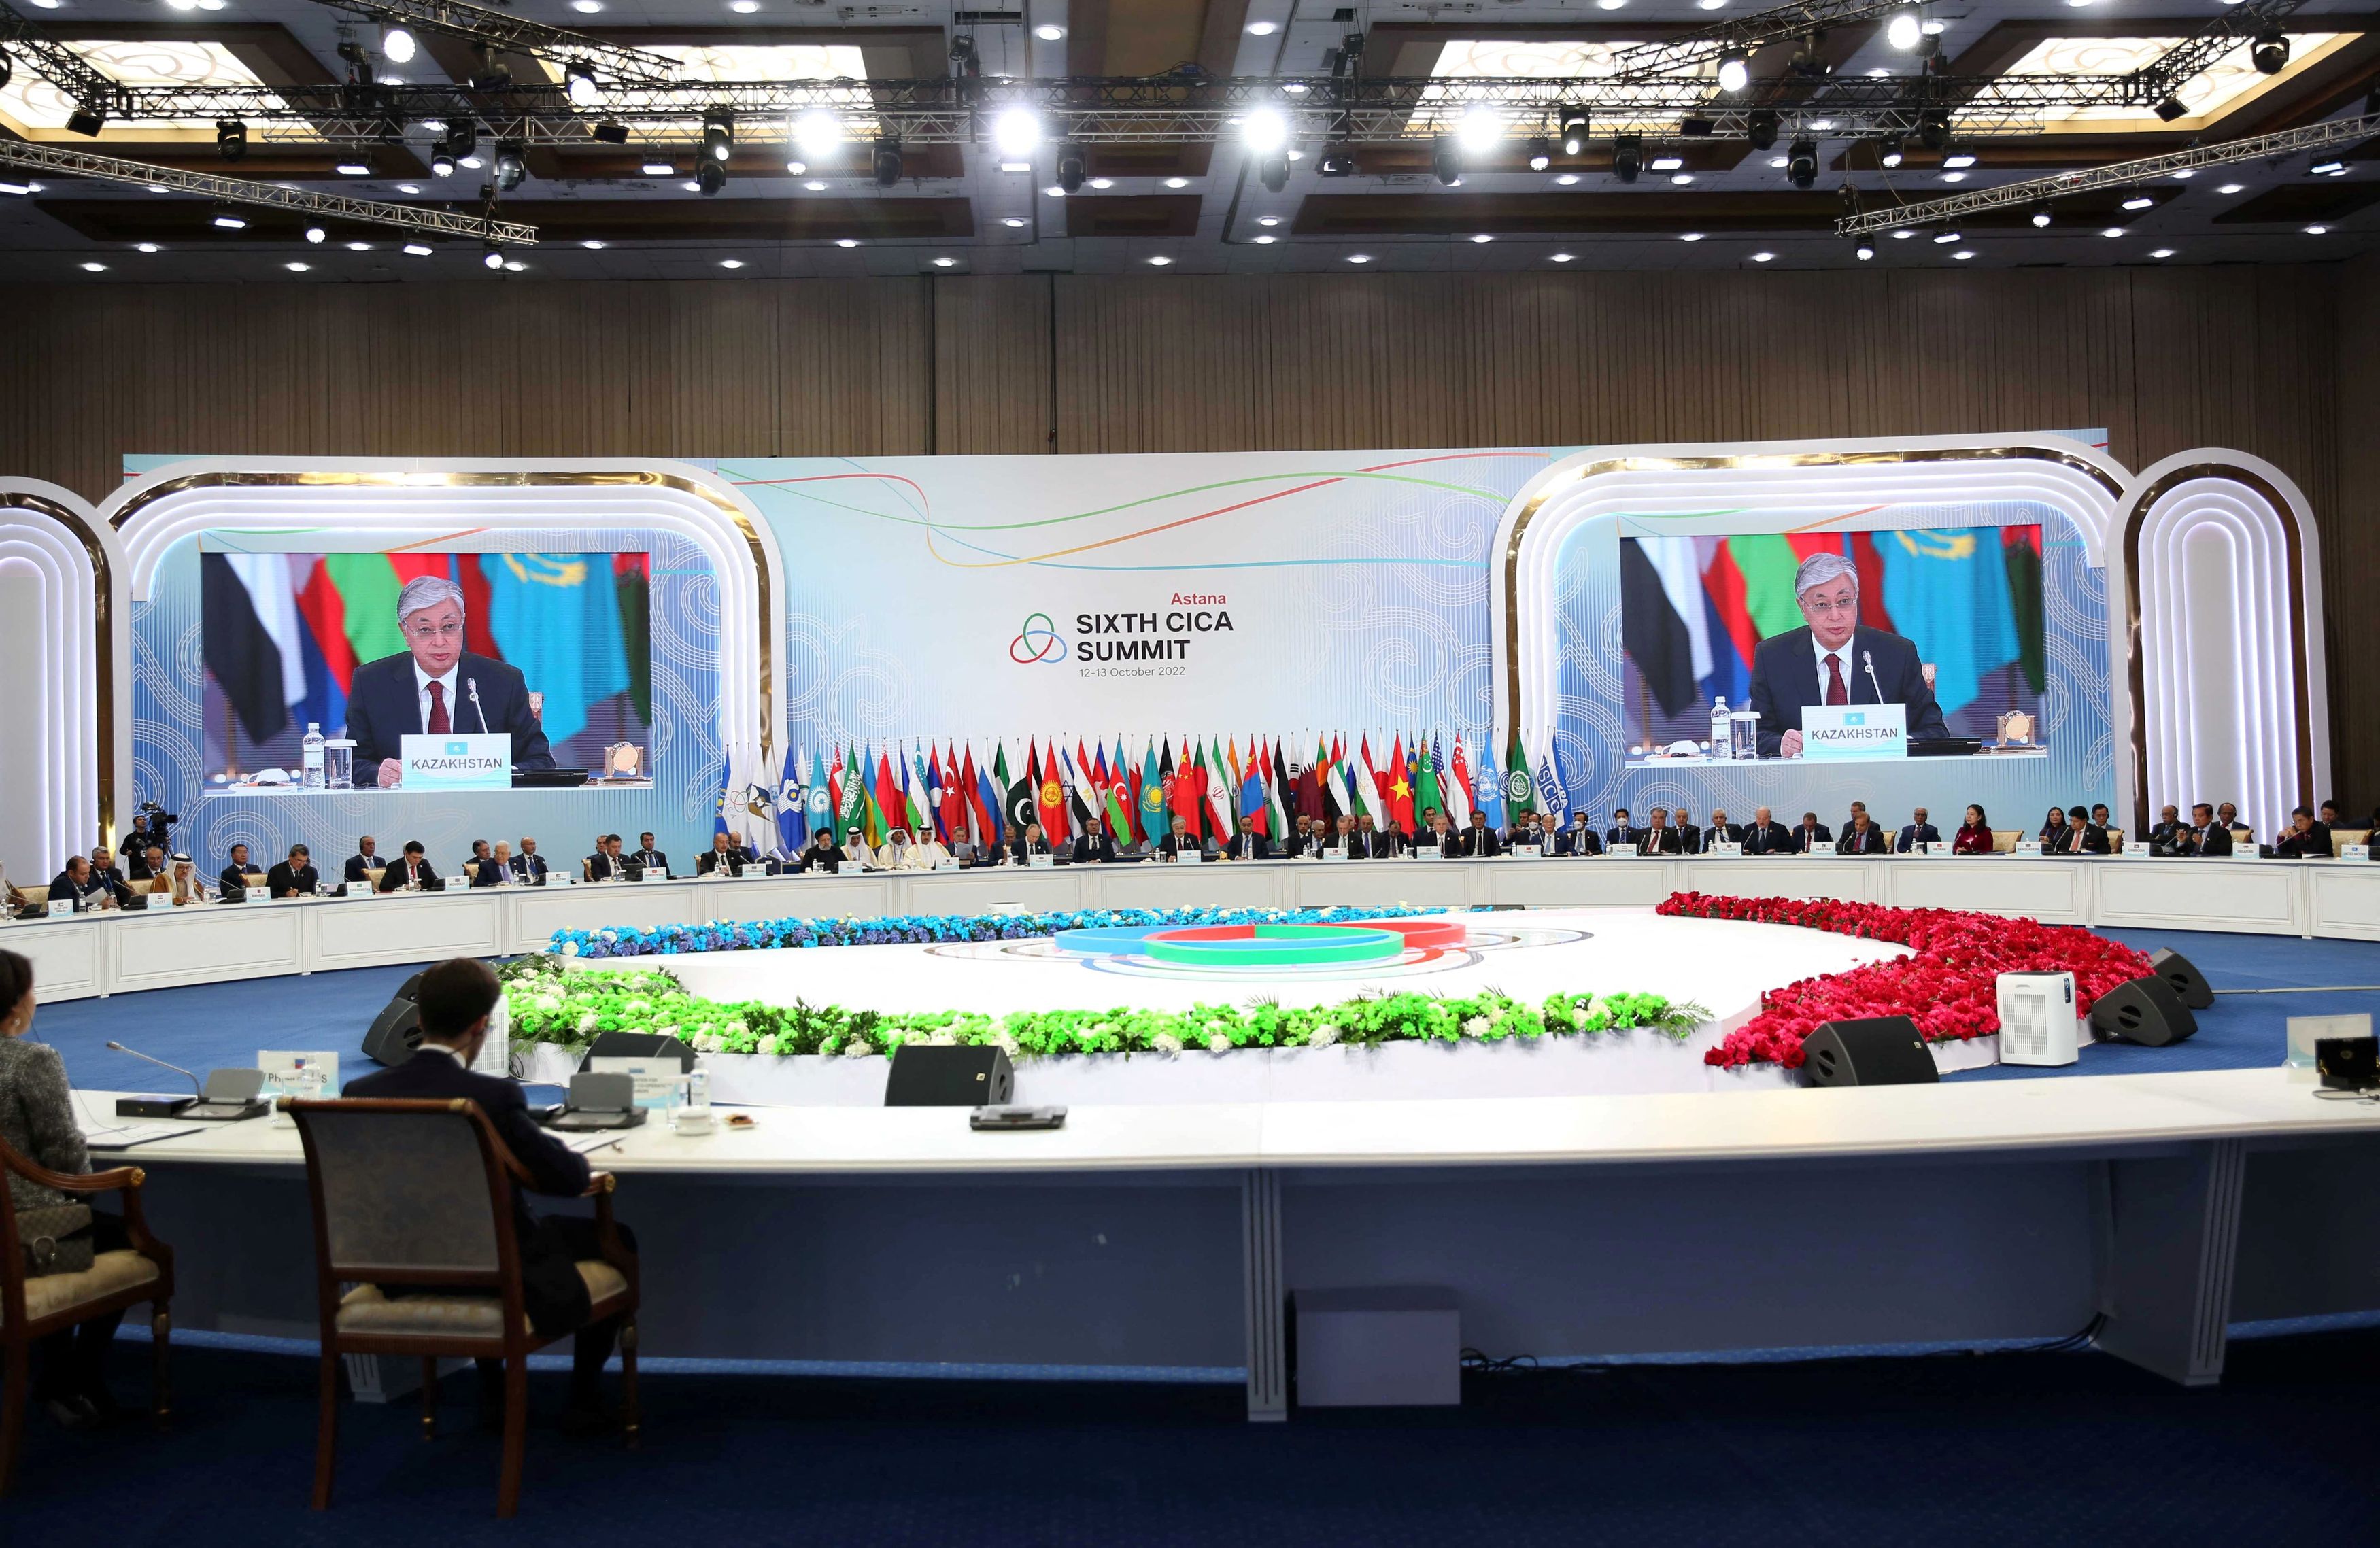 Heads of state and officials take part in the sixth summit of the Conference on Interaction and Confidence-Building Measures in Asia (CICA), in Astana, Kazakhstan October 13, 2022. /Reuters